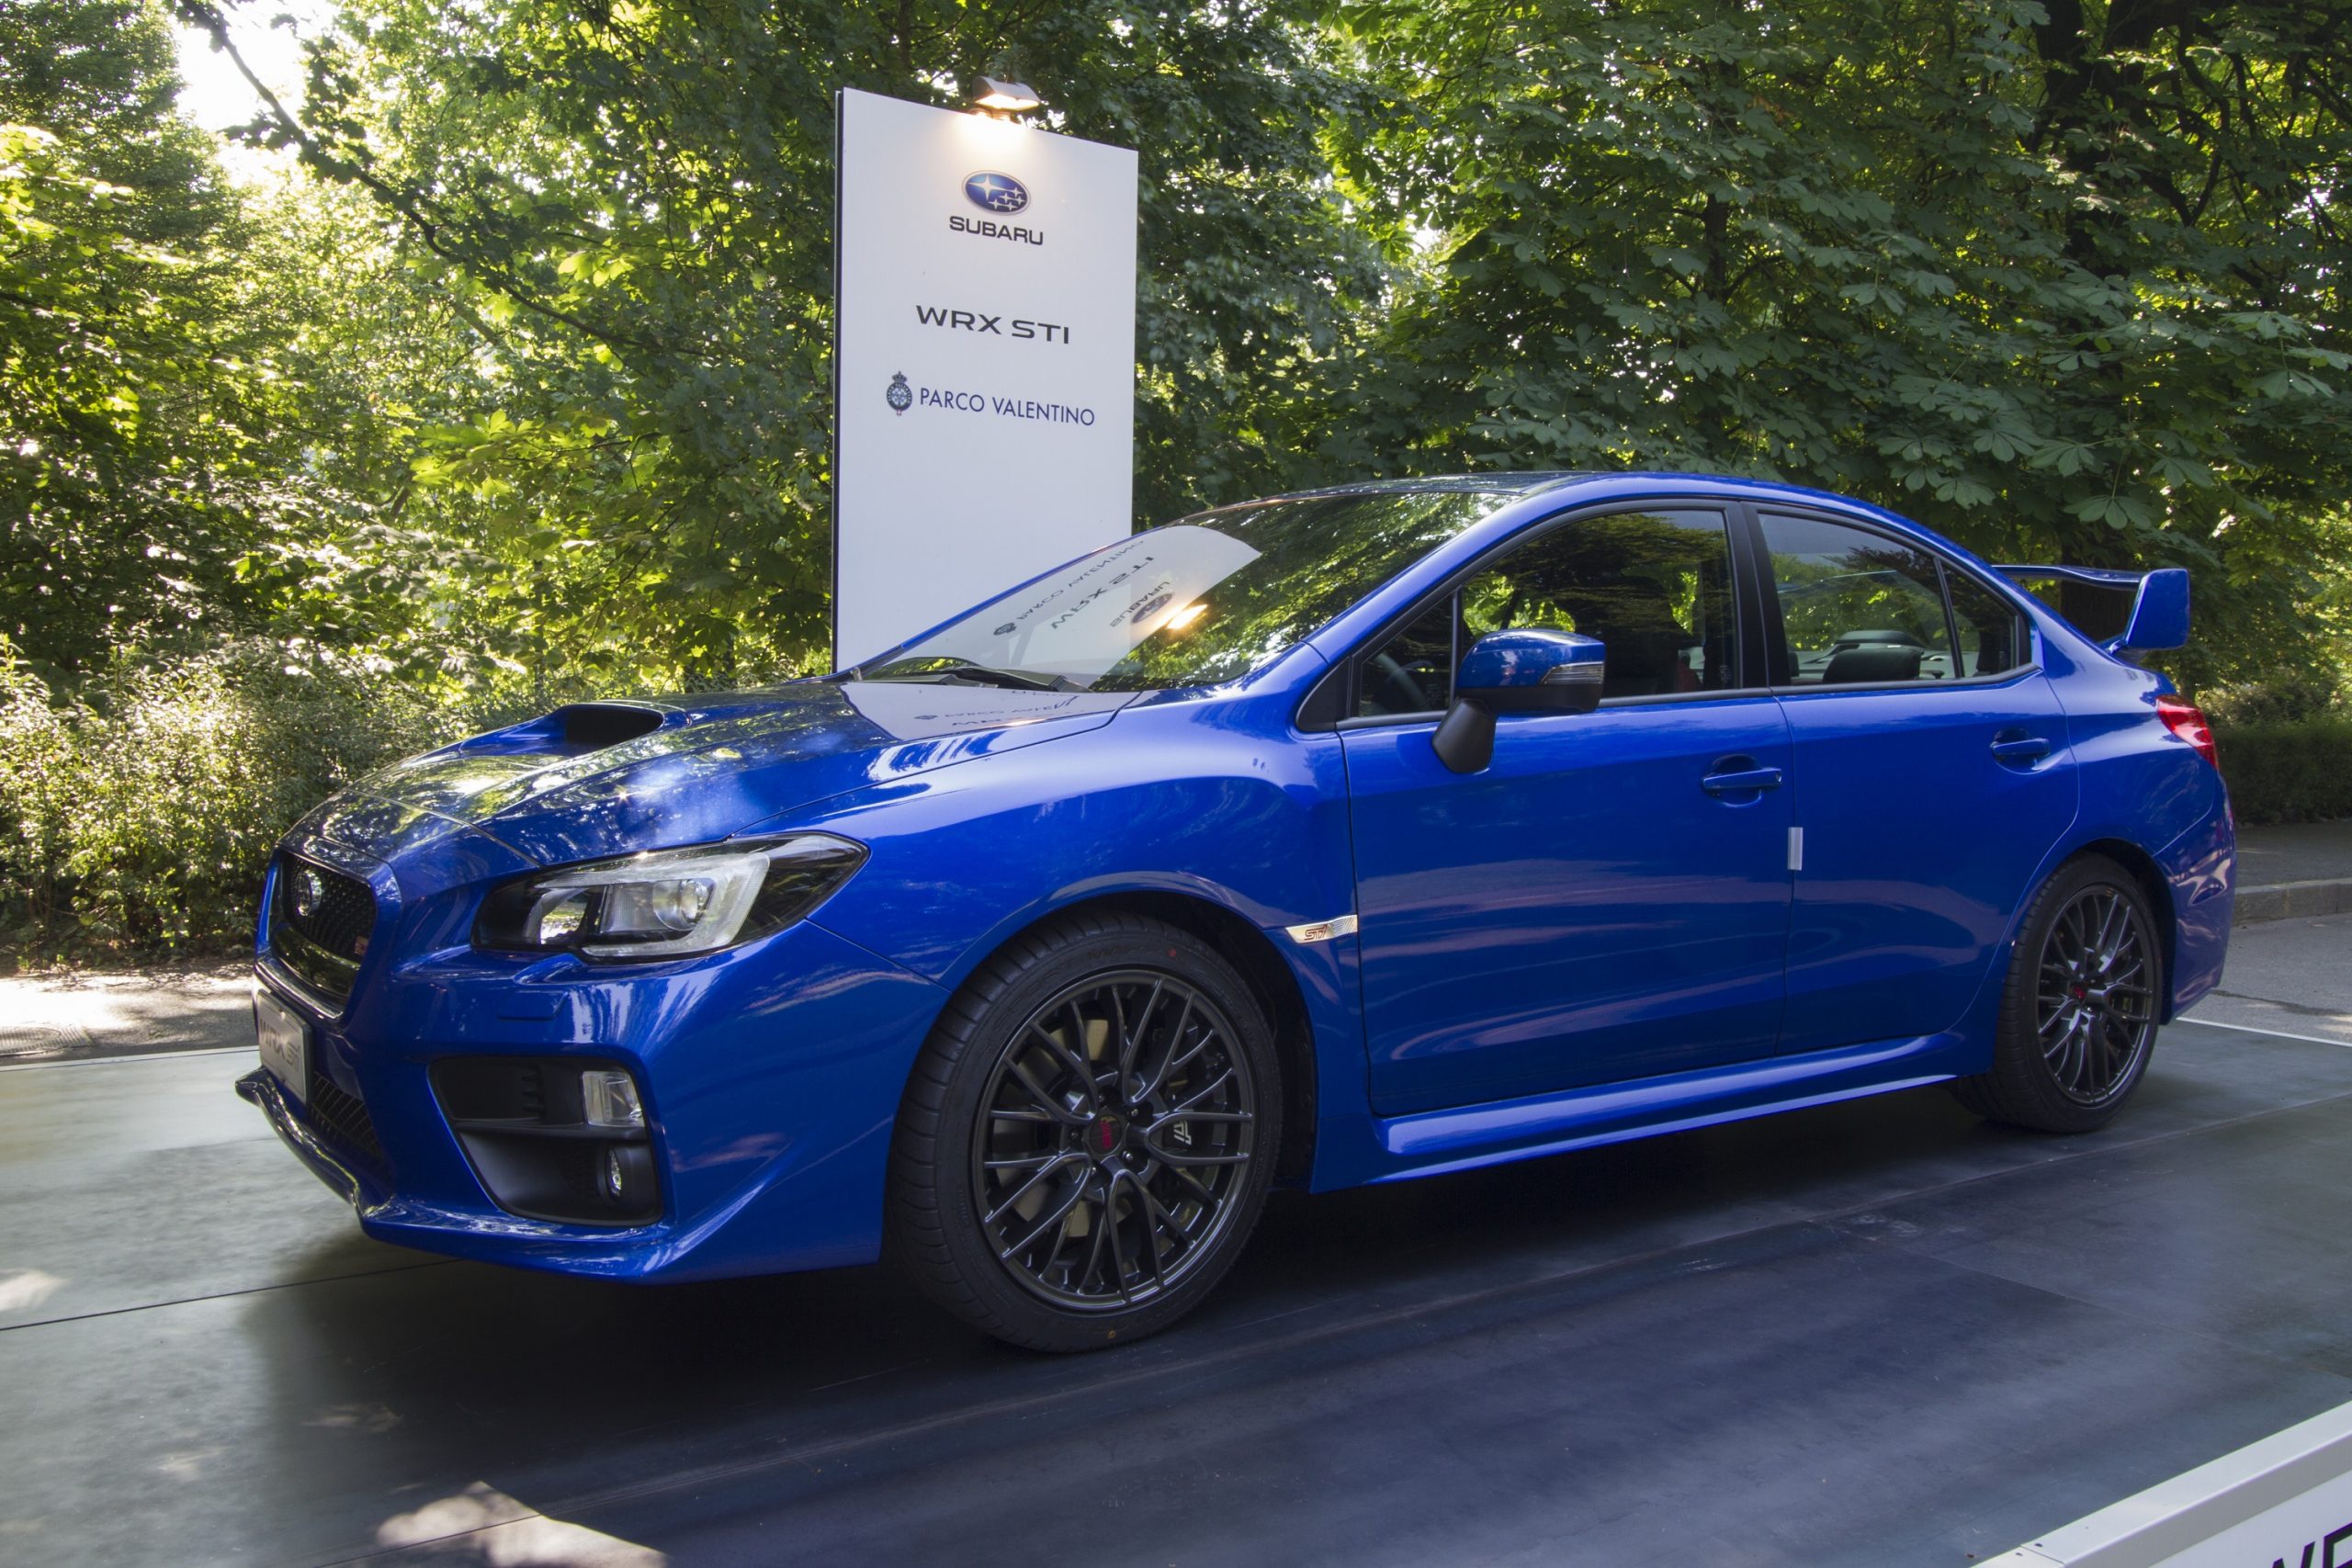 A blue Subaru WRX STI on a podium at an auto show shot from the front 3/4.